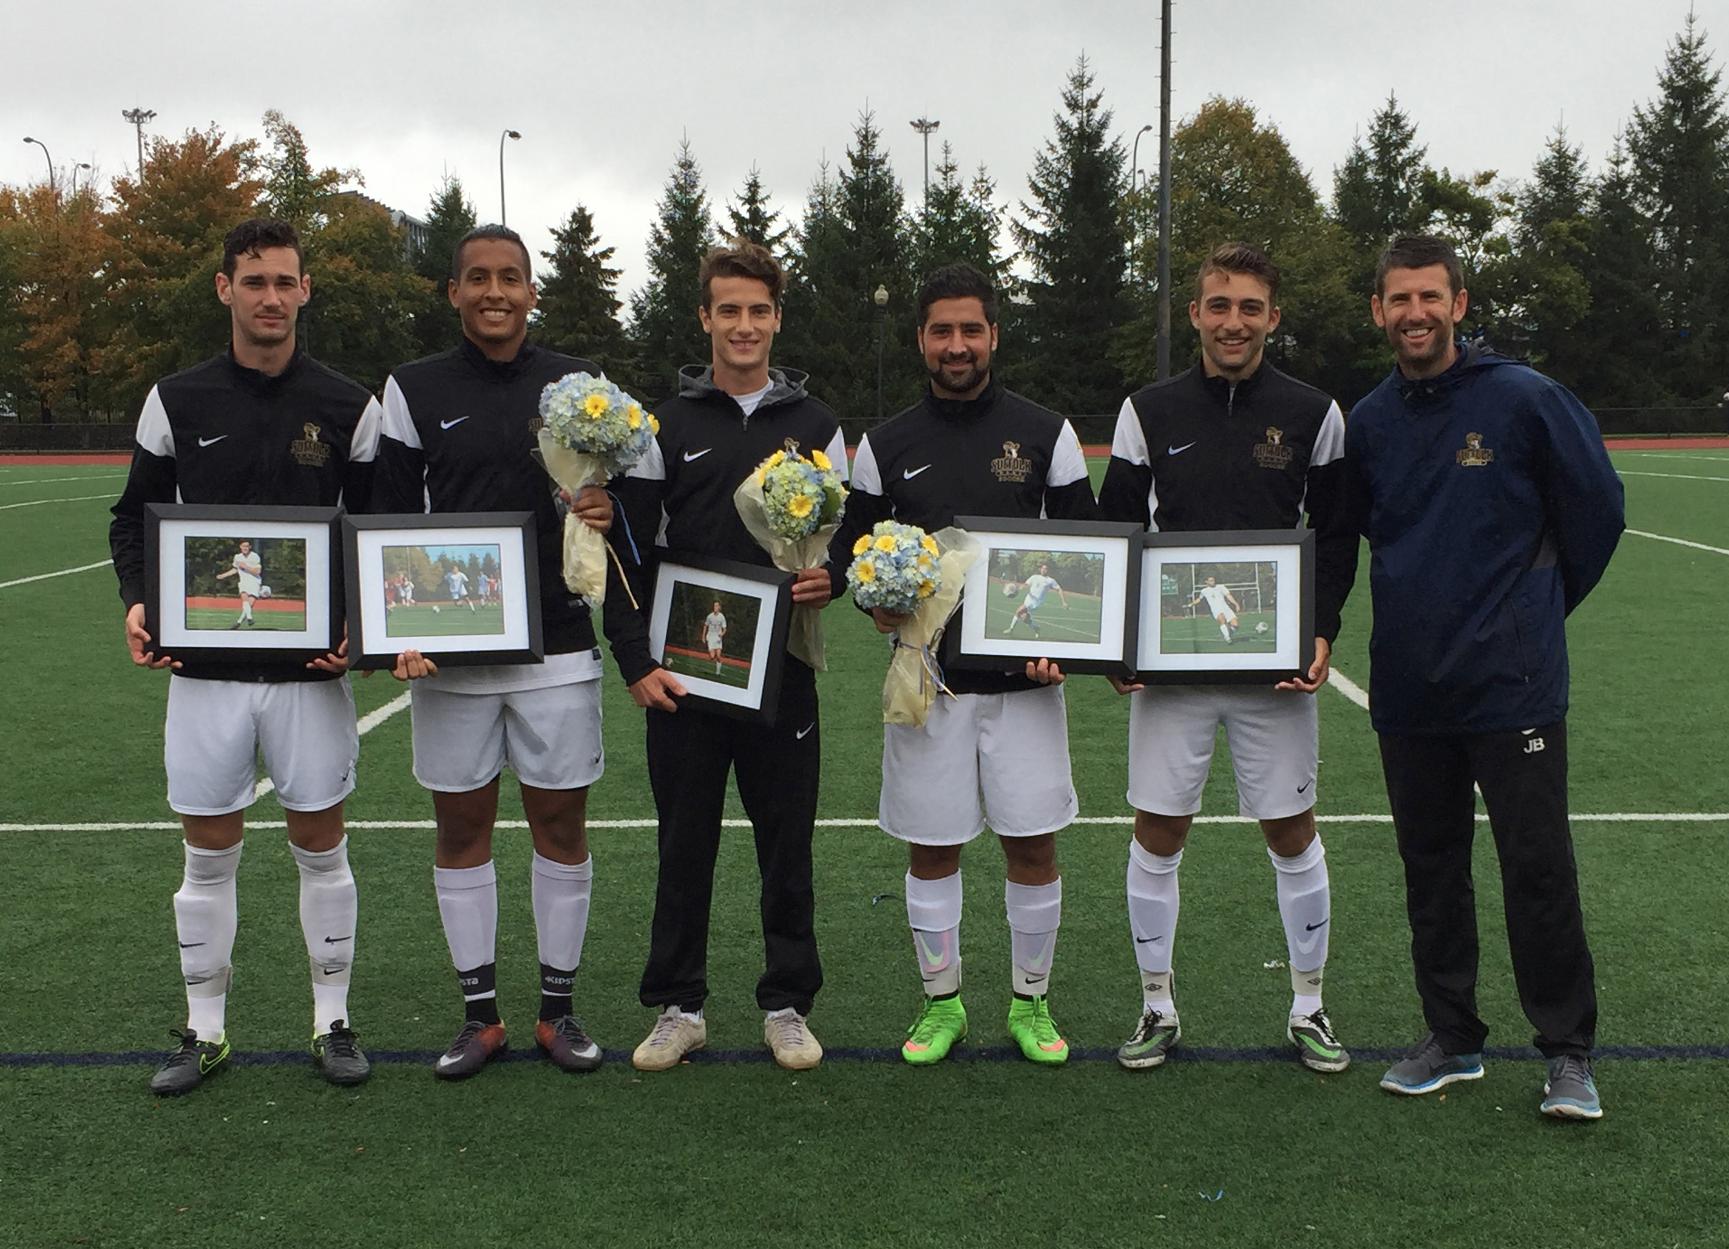 Men’s Soccer Clinches Home Field, Defeats Rivier, 2-1, on Senior Day